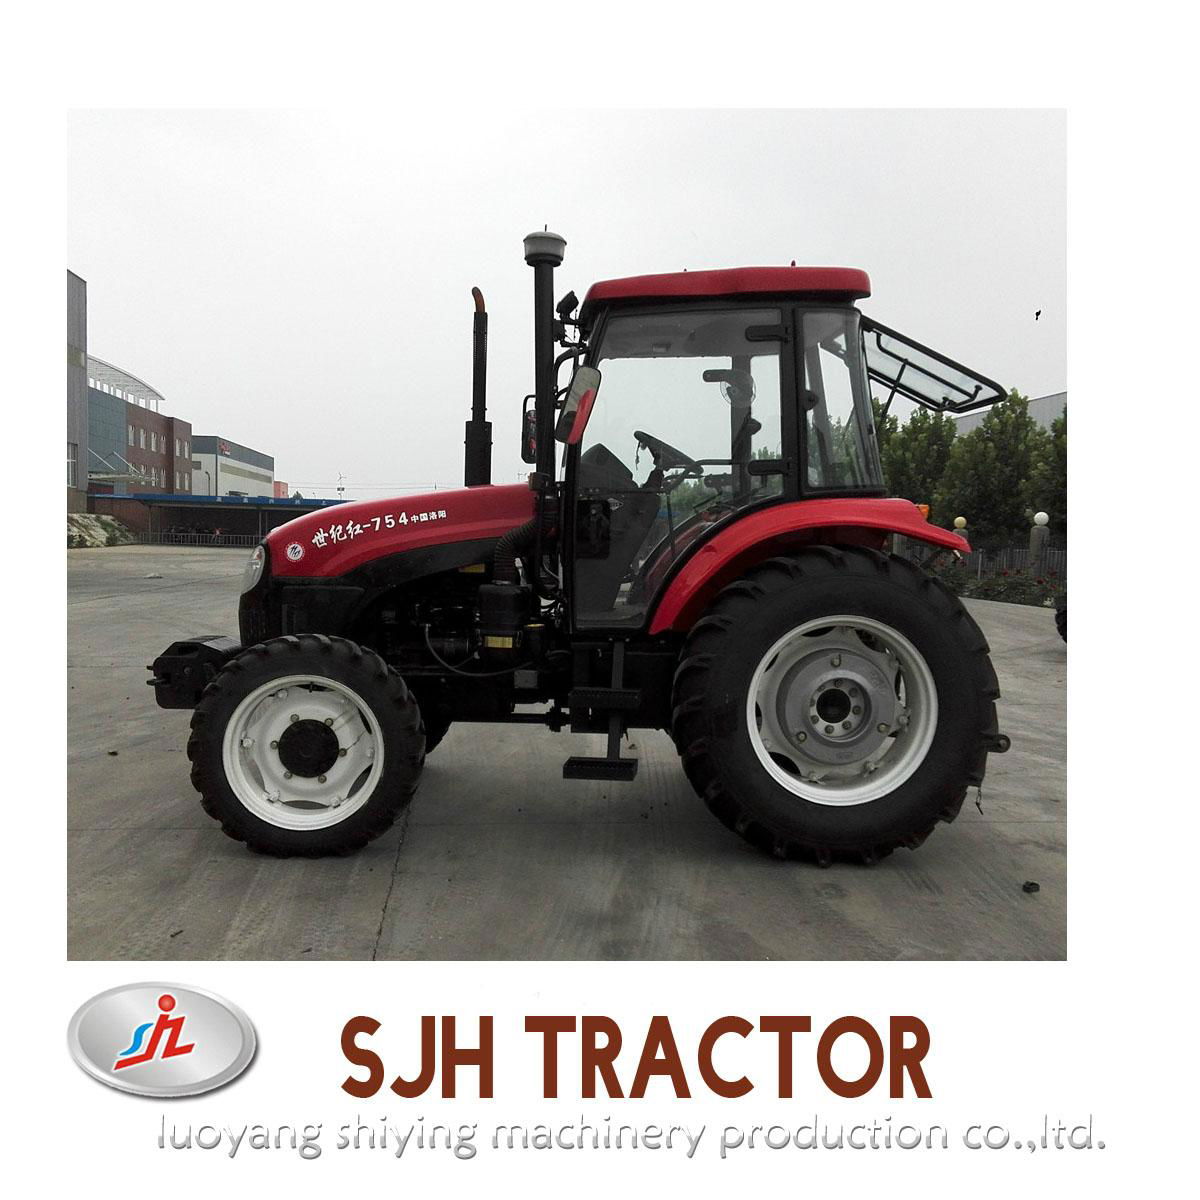 Made in China Modern Agricultural Use ,75hp Farm Tractor for Sale 3